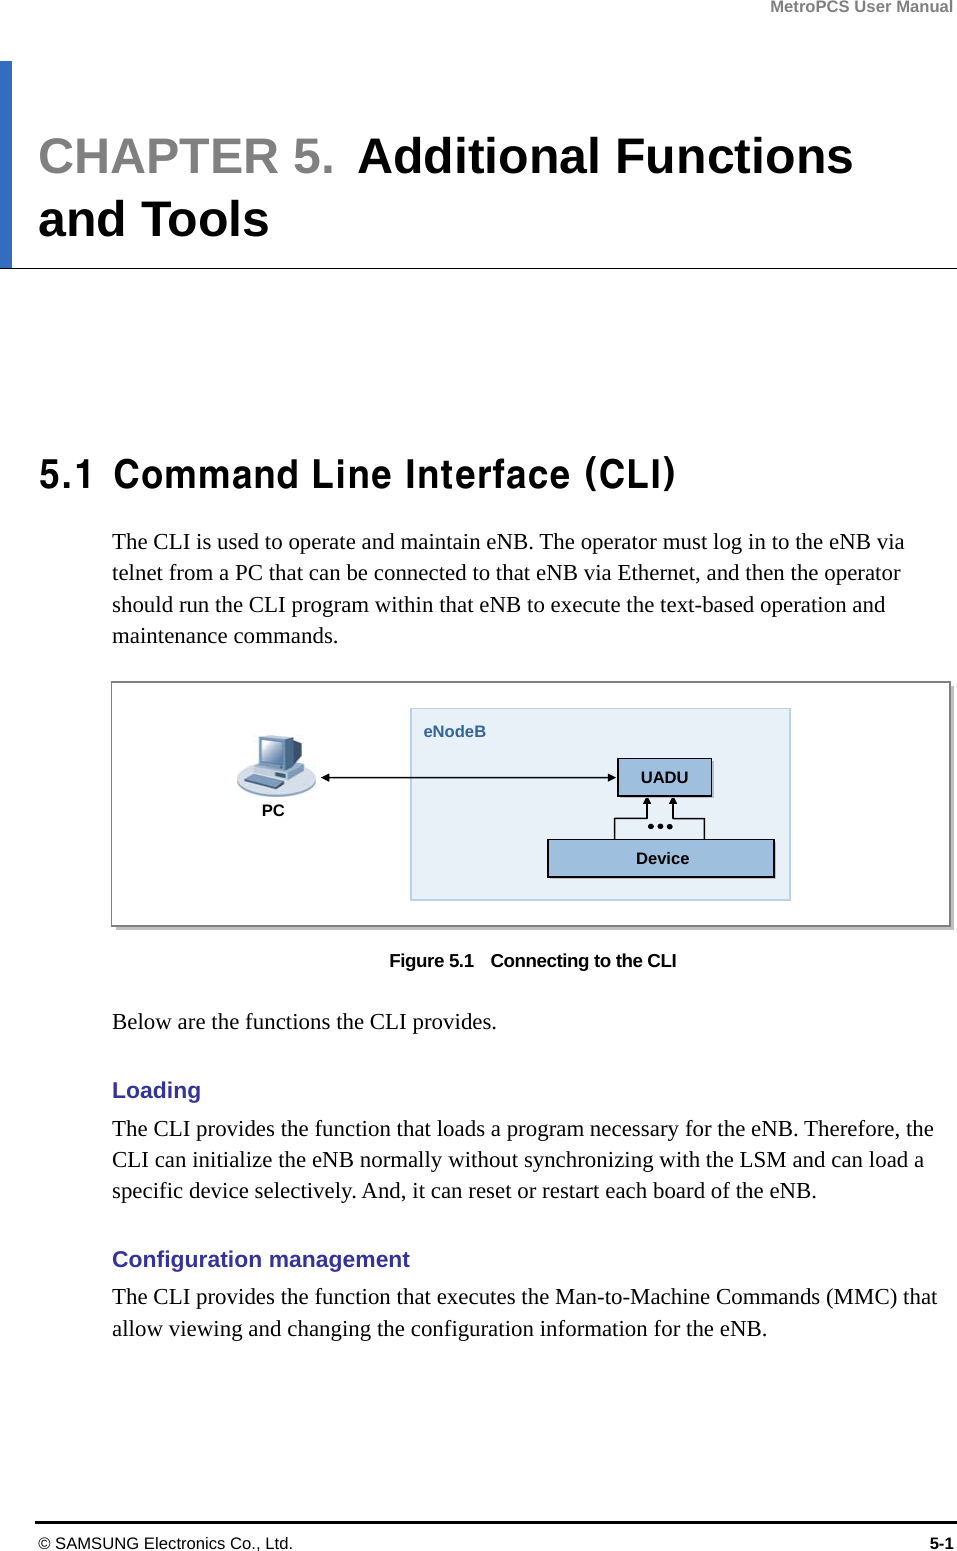 MetroPCS User Manual © SAMSUNG Electronics Co., Ltd.  5-1 CHAPTER 5.  Additional Functions and Tools      5.1  Command Line Interface (CLI) The CLI is used to operate and maintain eNB. The operator must log in to the eNB via telnet from a PC that can be connected to that eNB via Ethernet, and then the operator should run the CLI program within that eNB to execute the text-based operation and maintenance commands.  Figure 5.1    Connecting to the CLI  Below are the functions the CLI provides.  Loading The CLI provides the function that loads a program necessary for the eNB. Therefore, the CLI can initialize the eNB normally without synchronizing with the LSM and can load a specific device selectively. And, it can reset or restart each board of the eNB.  Configuration management The CLI provides the function that executes the Man-to-Machine Commands (MMC) that allow viewing and changing the configuration information for the eNB.  PC eNodeBDevice UADU 